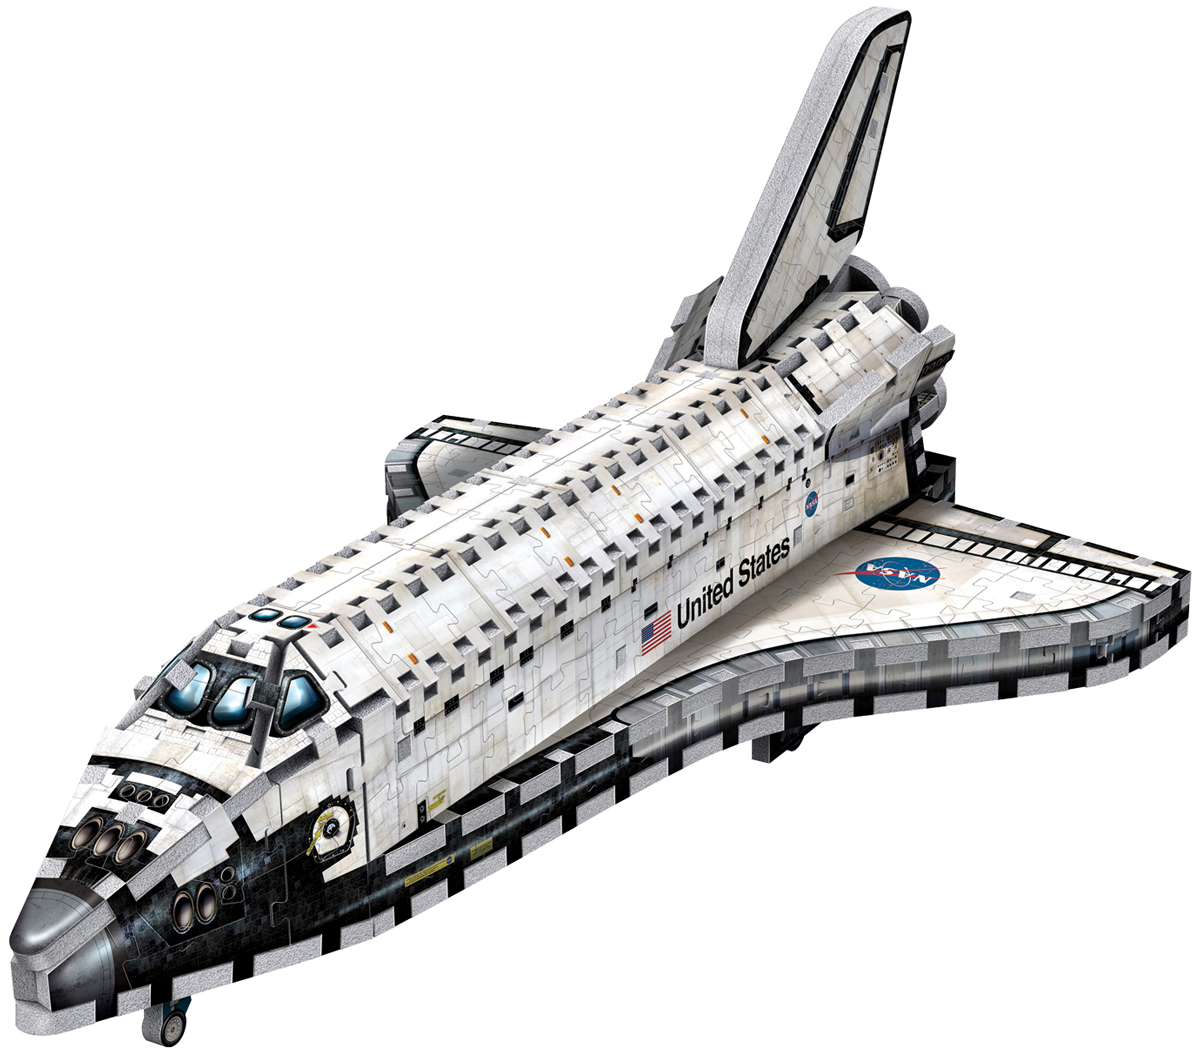 Space Shuttle - Orbiter Space Jigsaw Puzzle